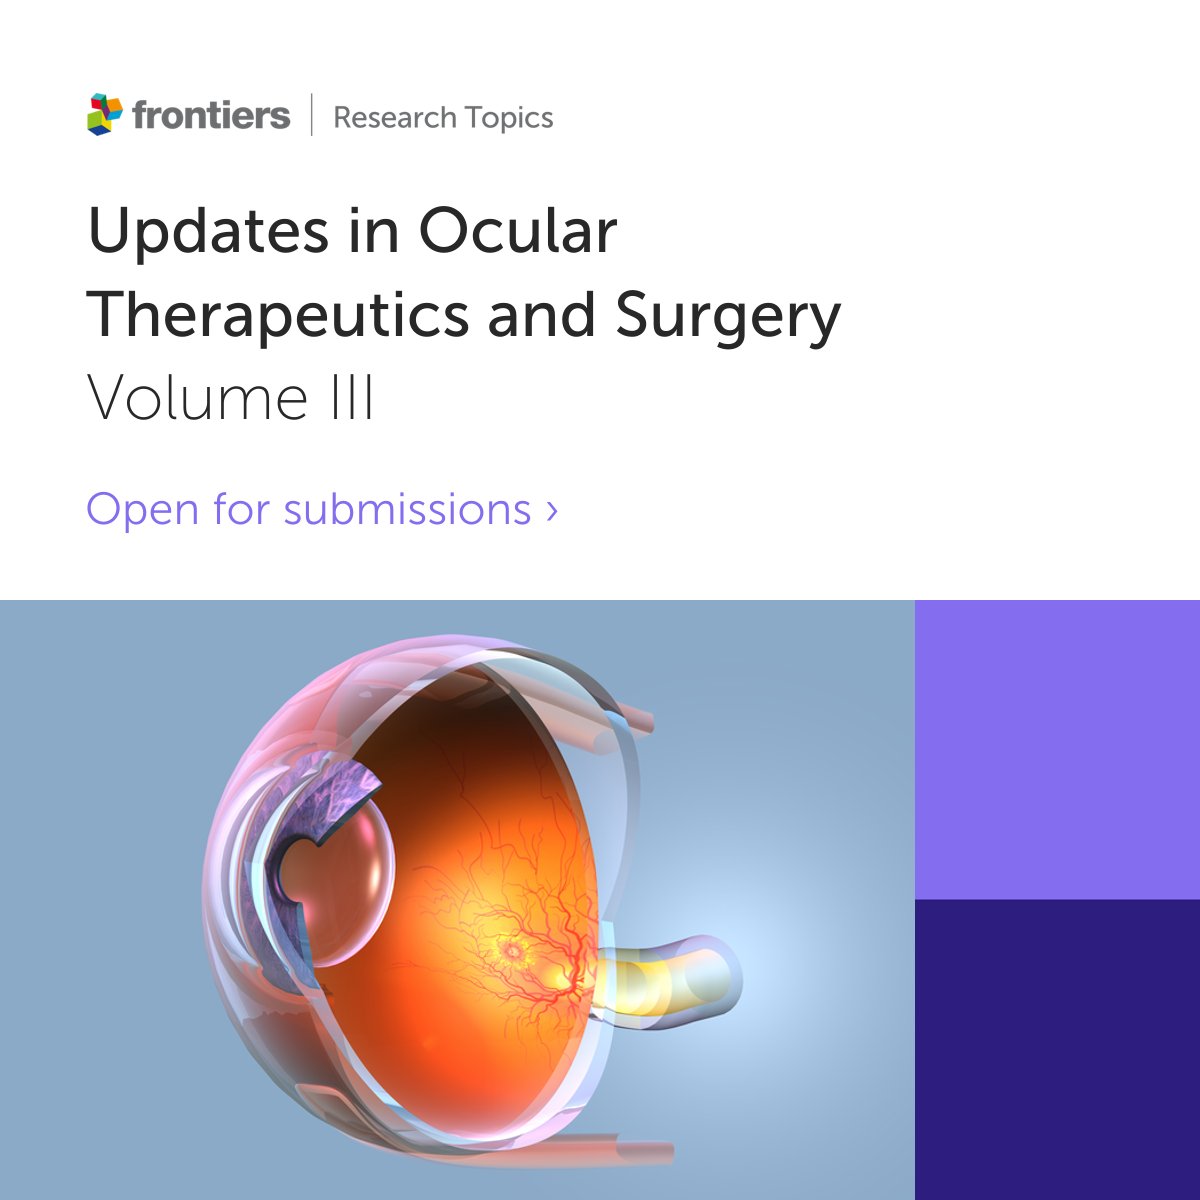 📢 Call for papers! Submissions are open for our new article collection 'Updates in Ocular Therapeutics and Surgery - Volume III' Edited by Georgios Panos and Horace Massa Submit your article or find out more ➡️ fro.ntiers.in/62416